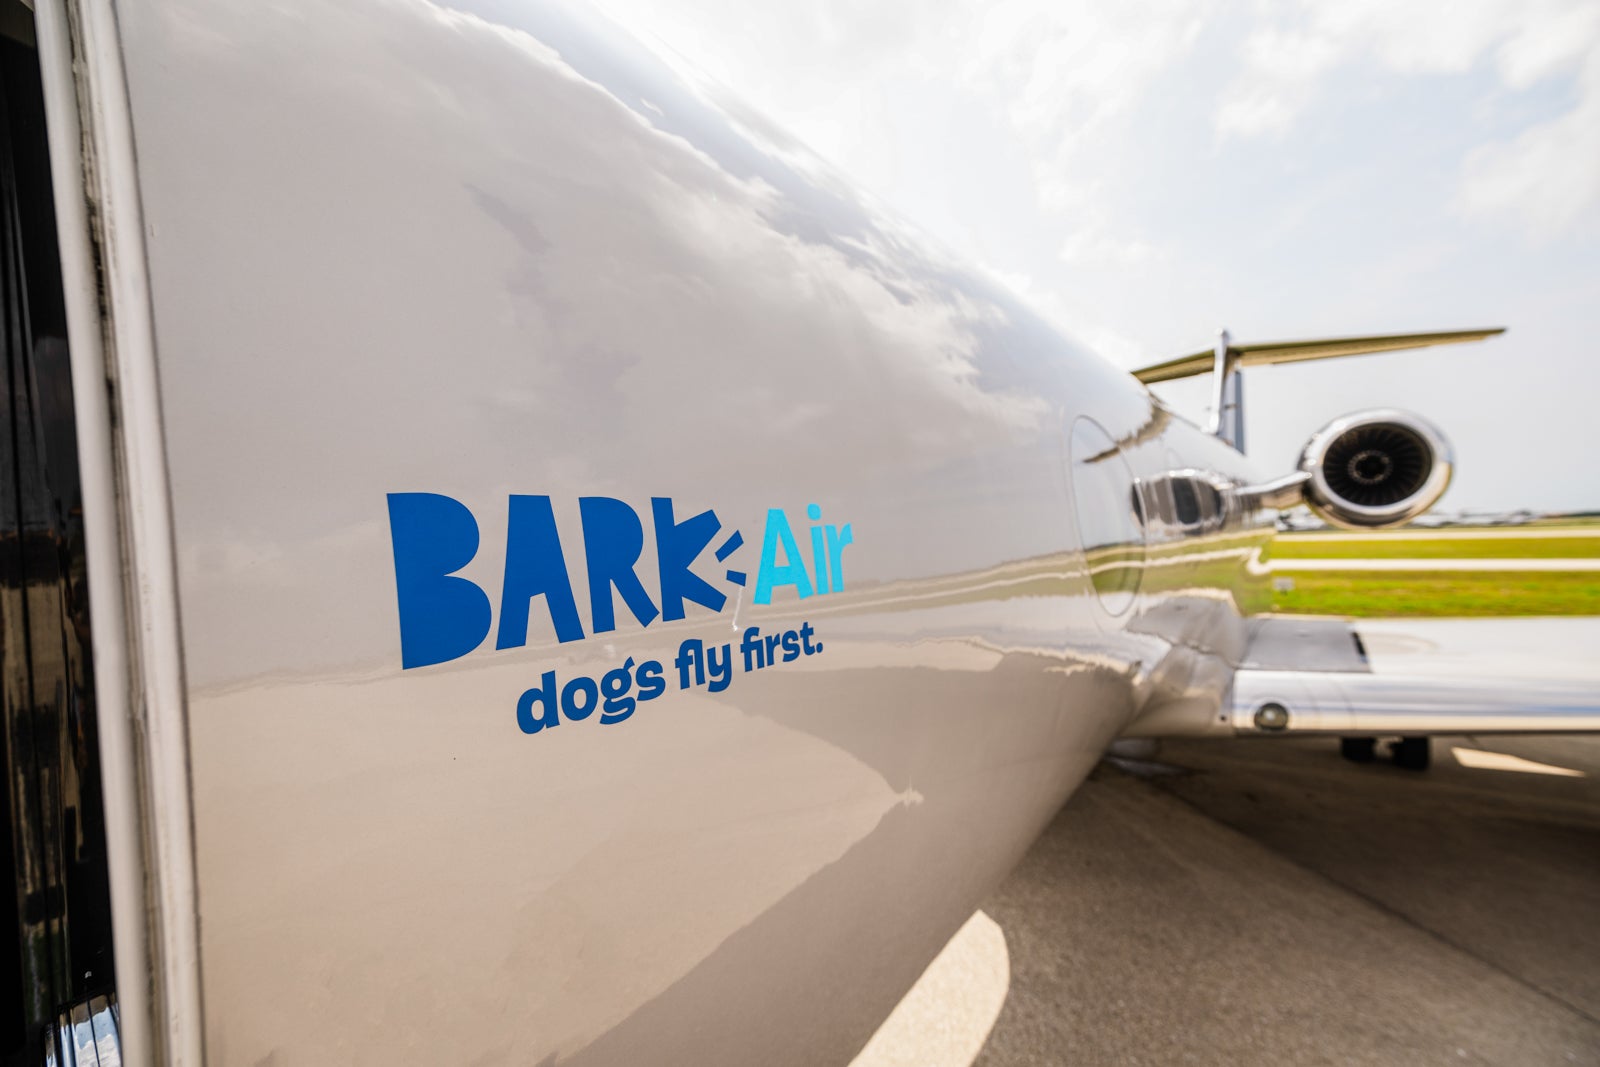 You are currently viewing Bark (Air) or bite: Cat fight over dog flights